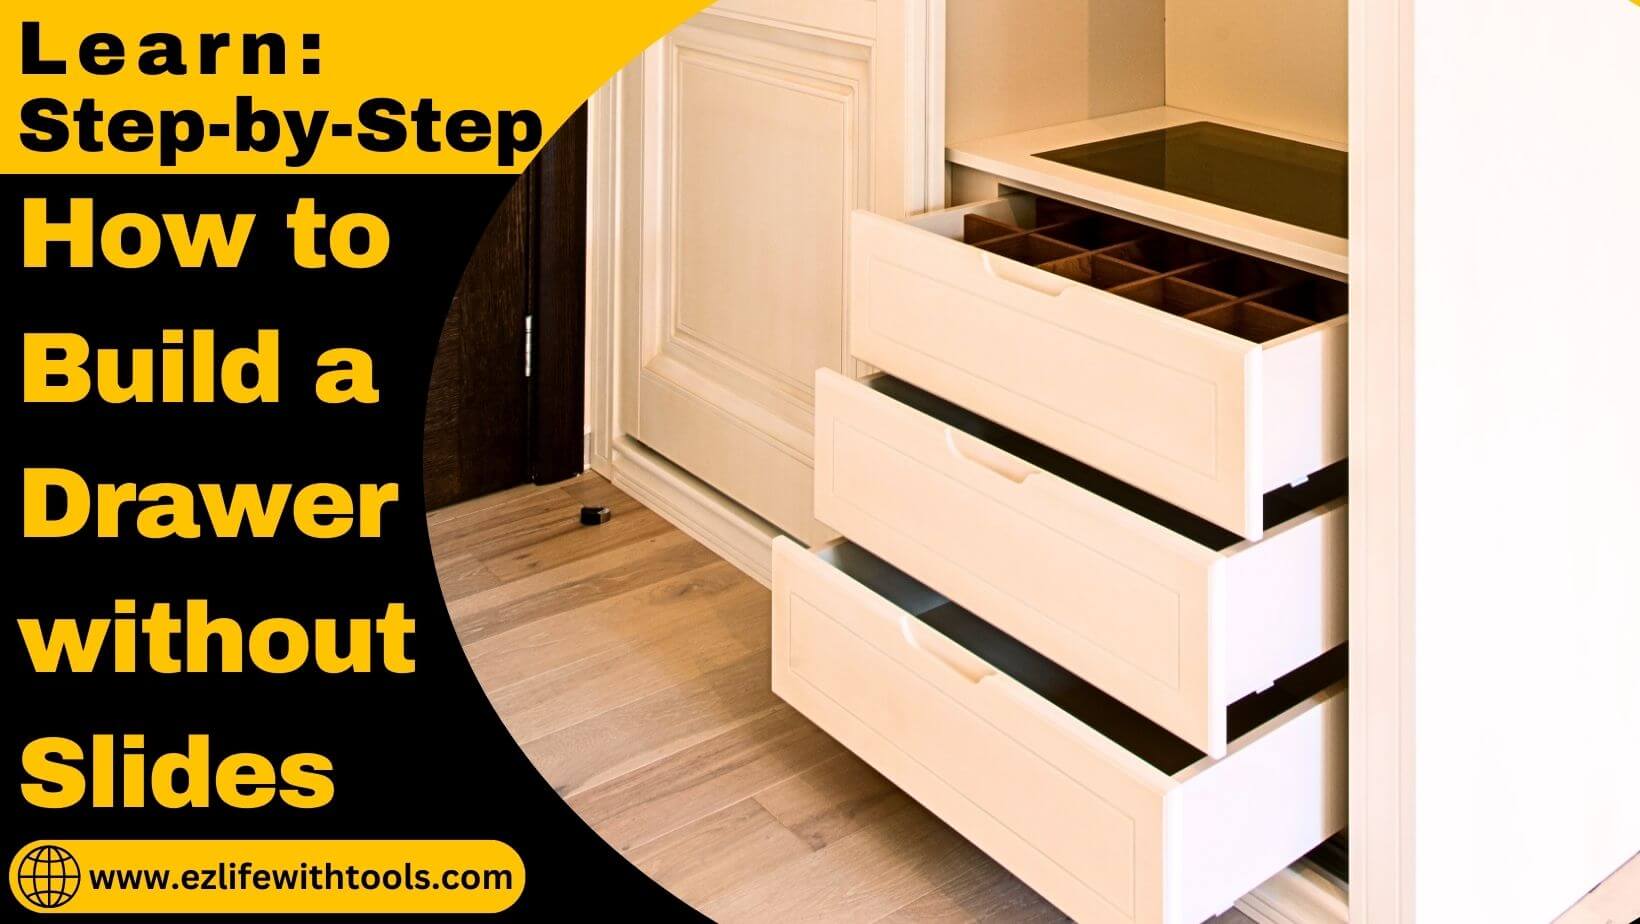 How to Build a Drawer without Slides